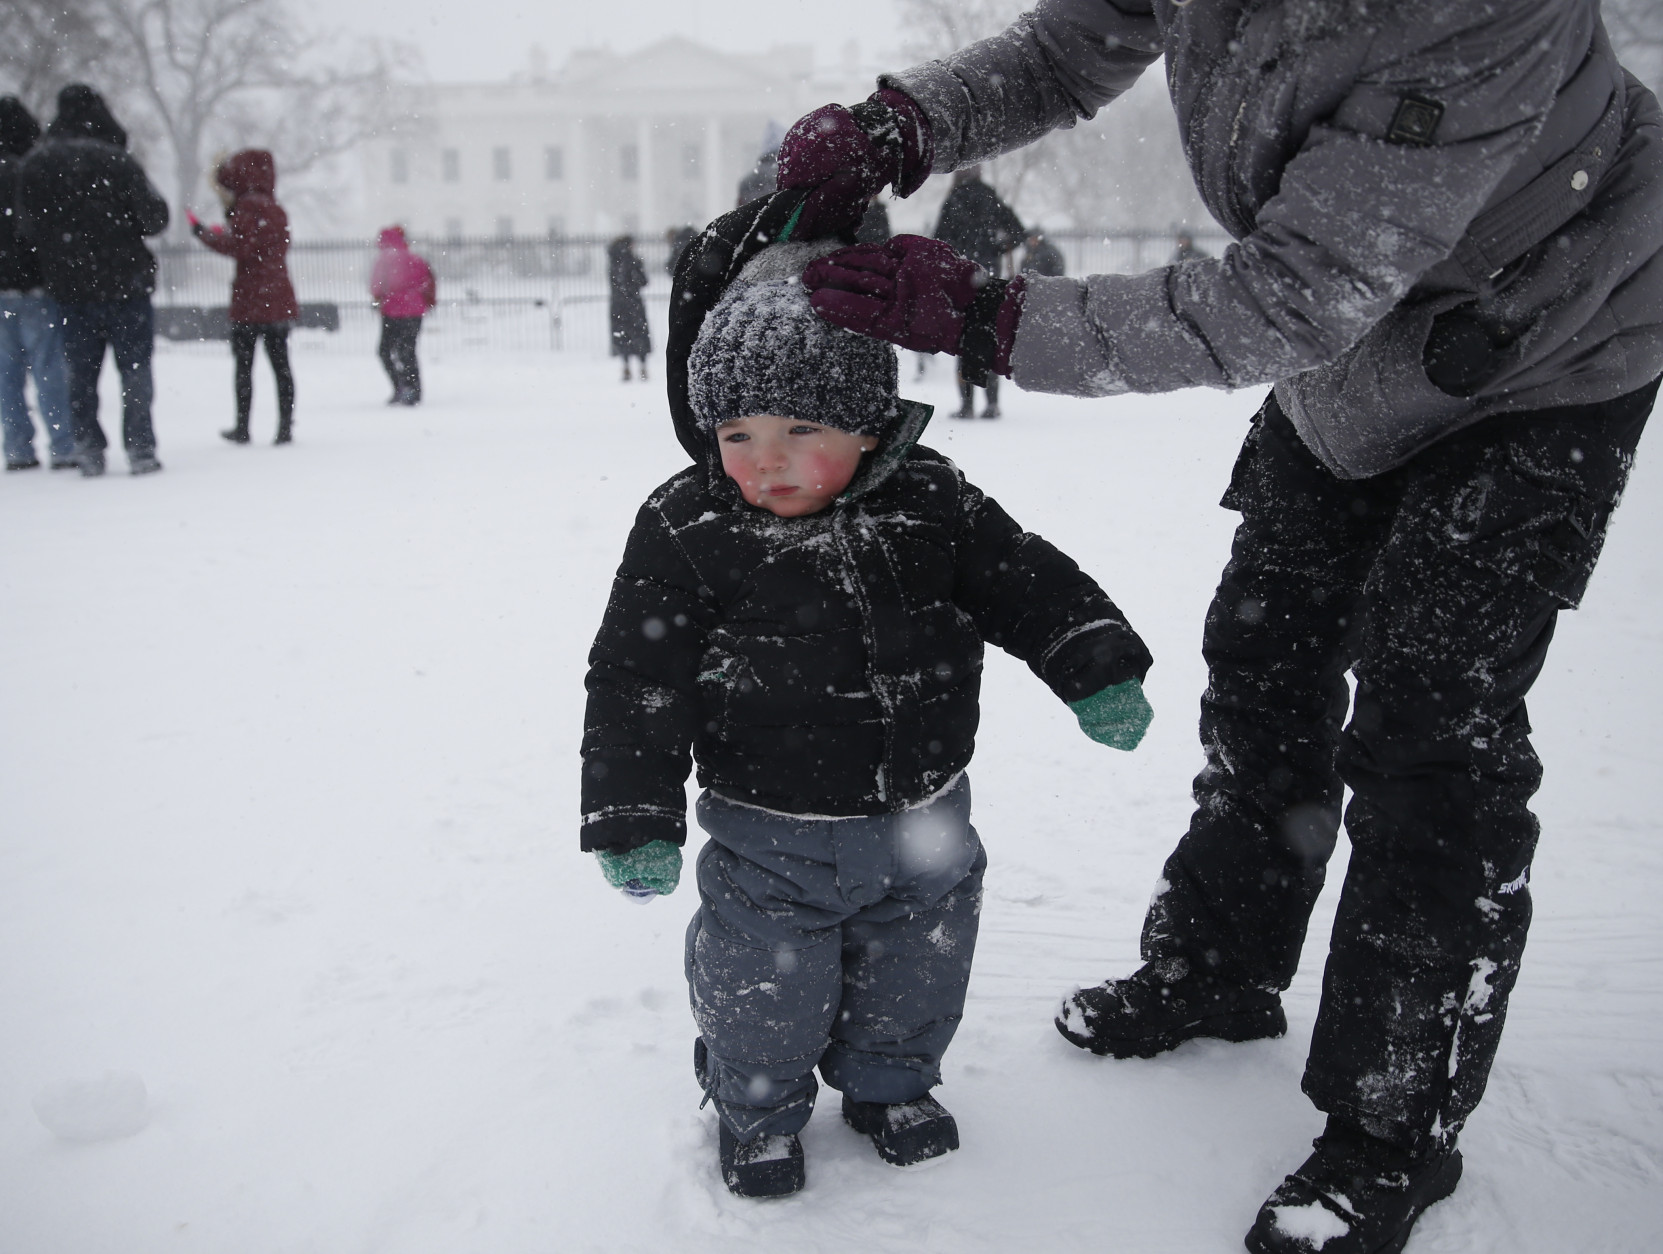 Meghan Murphy of Crofton, Md., adjusts the hat of her son Chase Murphy,  1, during heavy snowfall in front of the White House in Washington on Saturday, Jan. 23, 2016.  A blizzard with hurricane-force winds brought much of the East Coast to a standstill Saturday, dumping as much as 3 feet of snow, stranding tens of thousands of travelers and shutting down the nation's capital and its largest city.(AP Photo/Gerald Herbert)